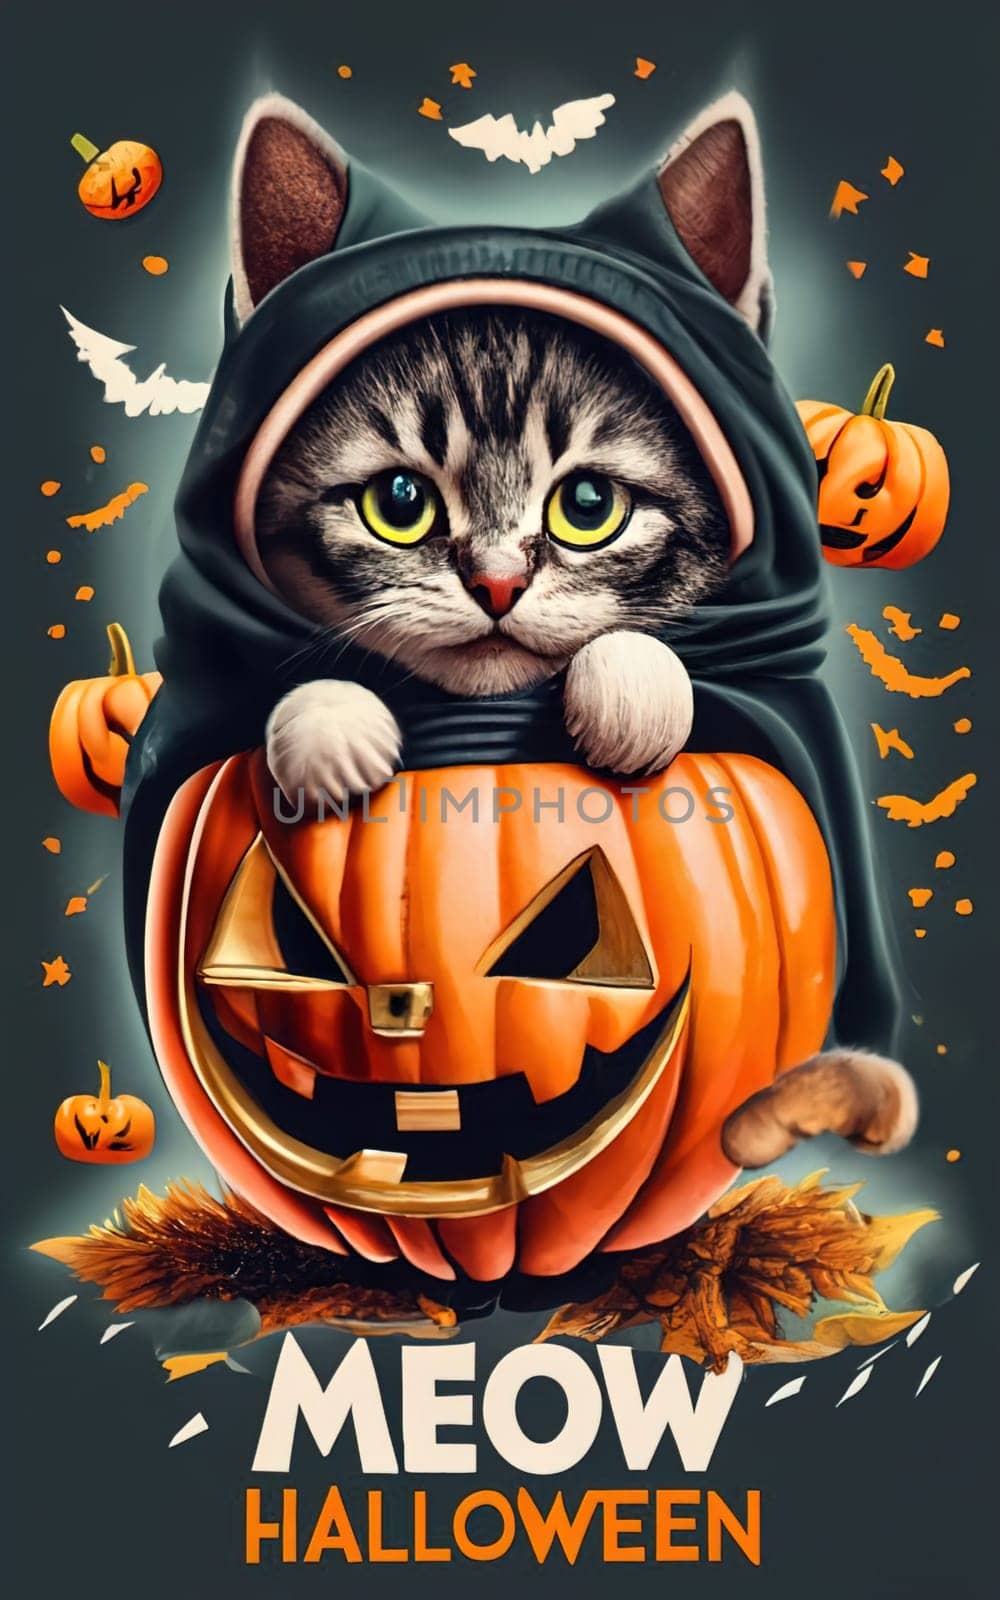 T-Shirt Design: 'Meow Halloween' - Masterful Photorealistic Cat in Pumpkin Hollowing Illustration download image